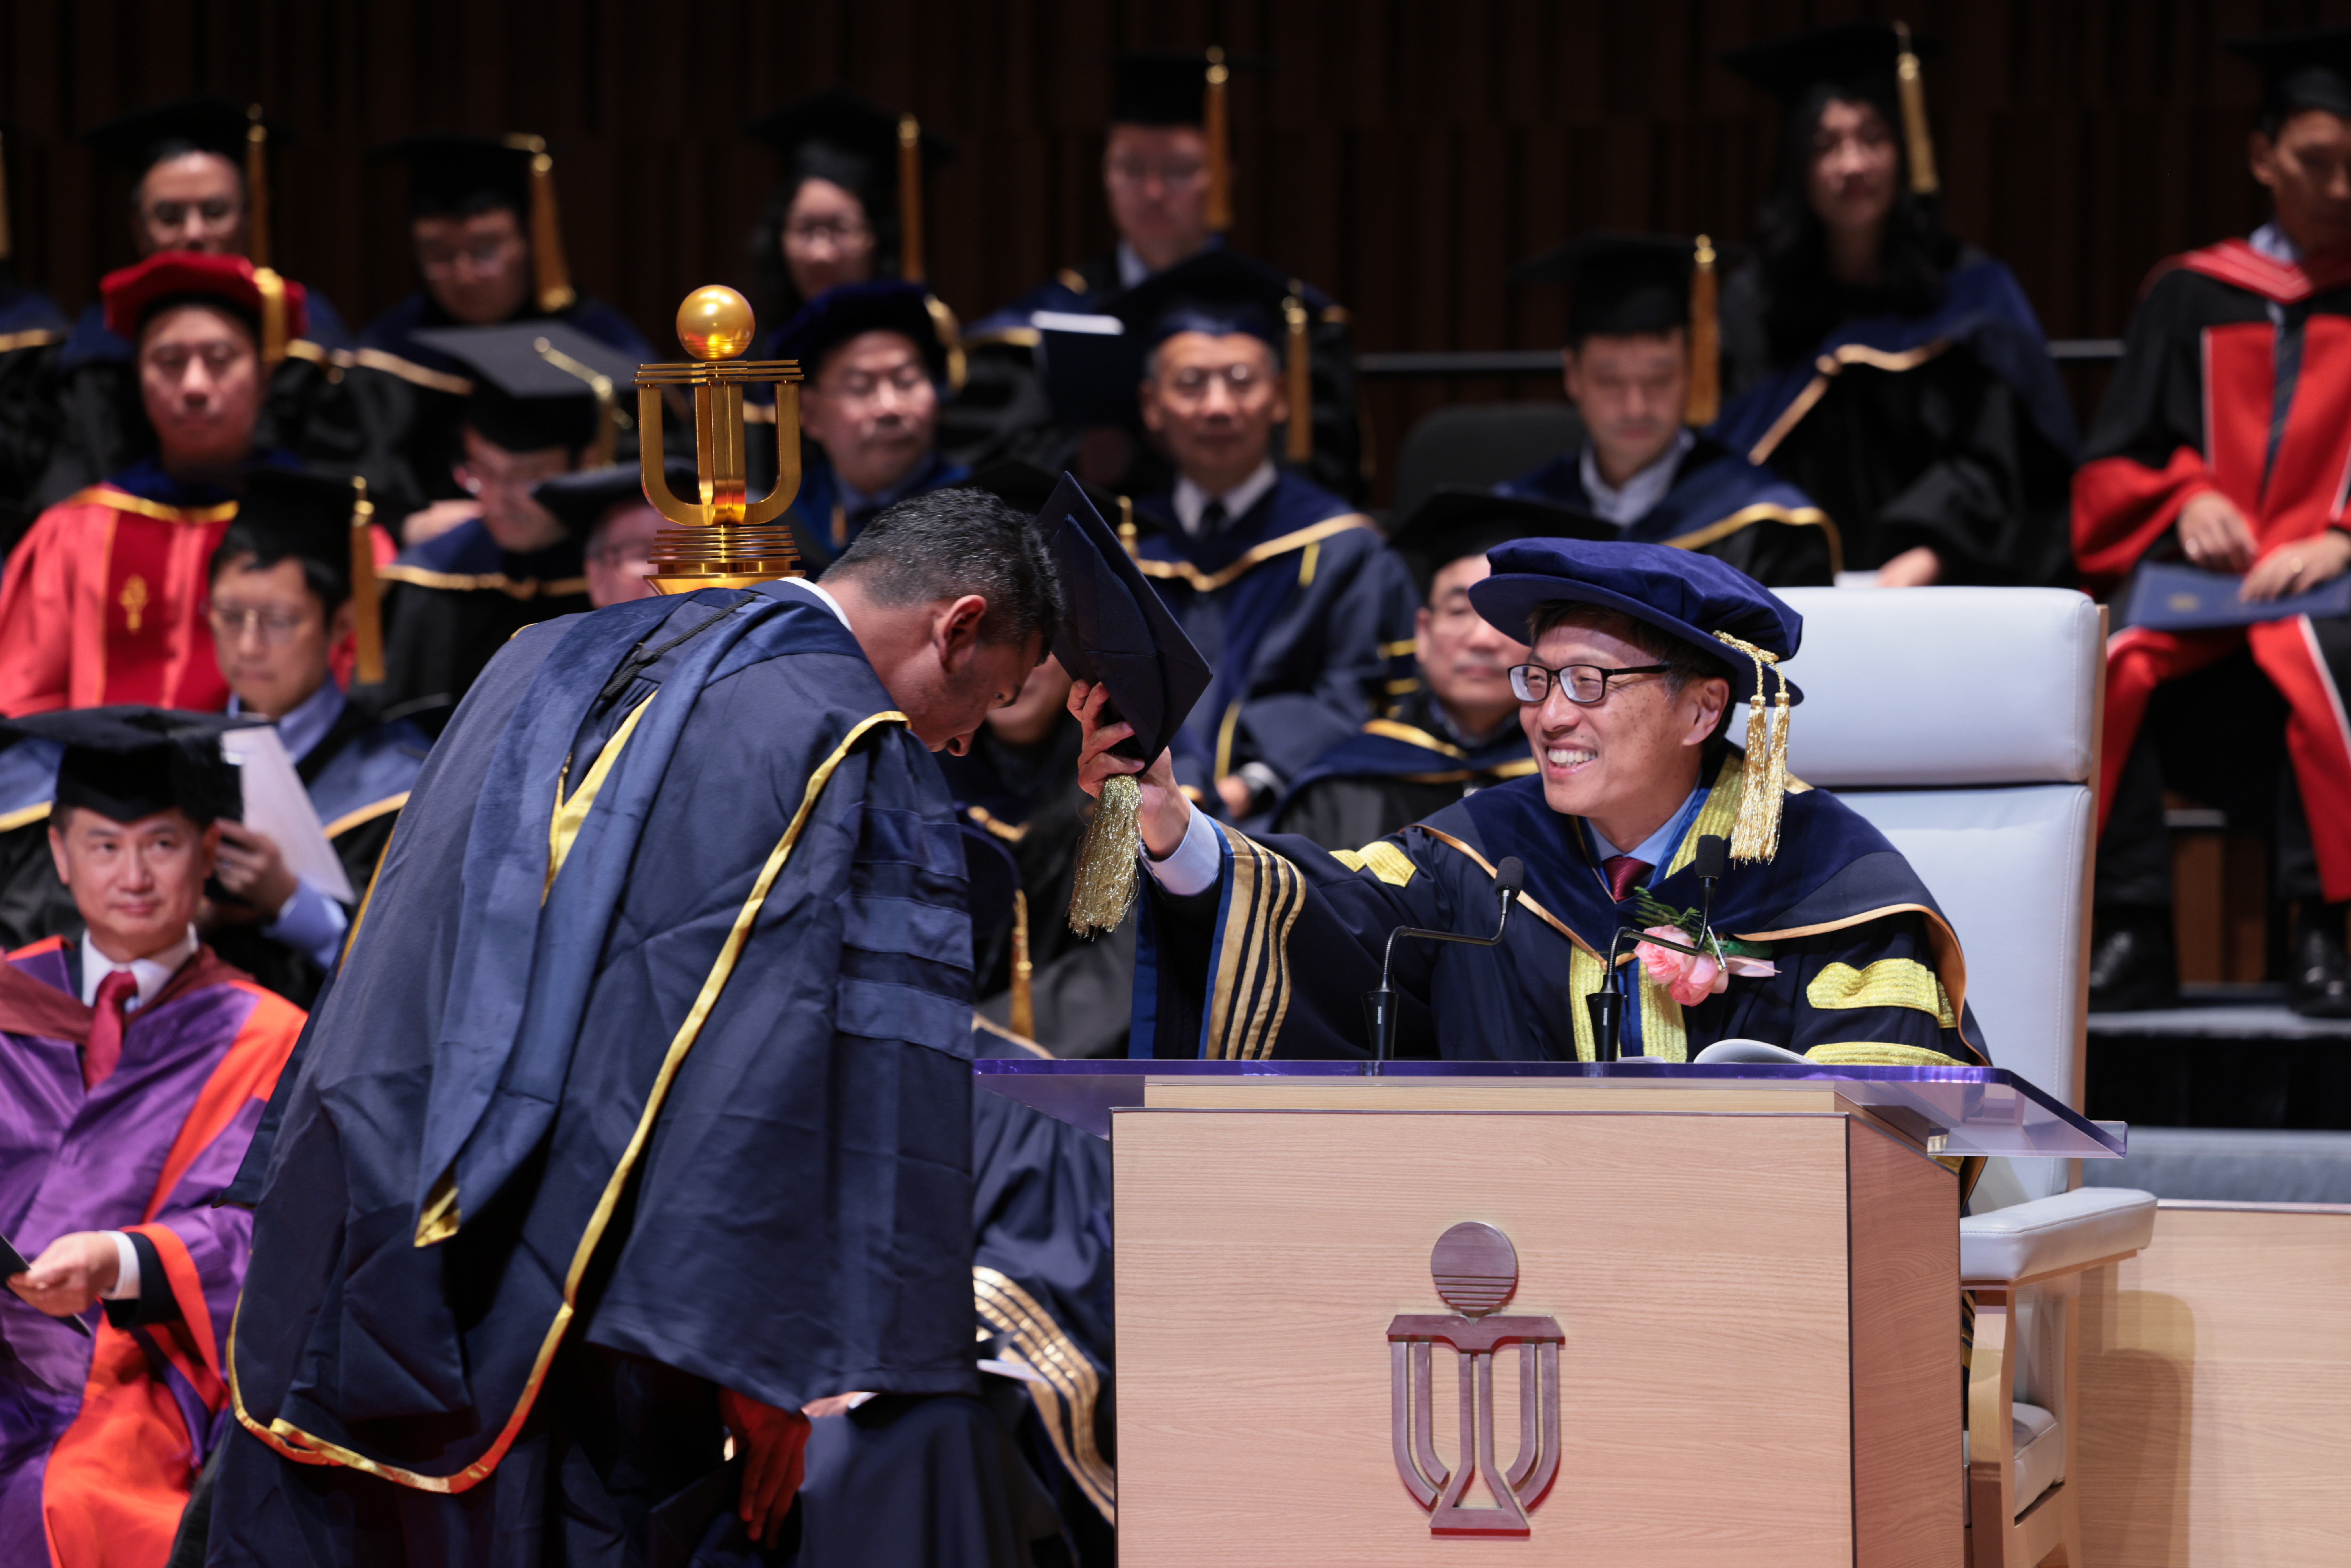 HKUST Council Chairman Prof. Harry SHUM confers degrees to graduates in the second session of the ceremony